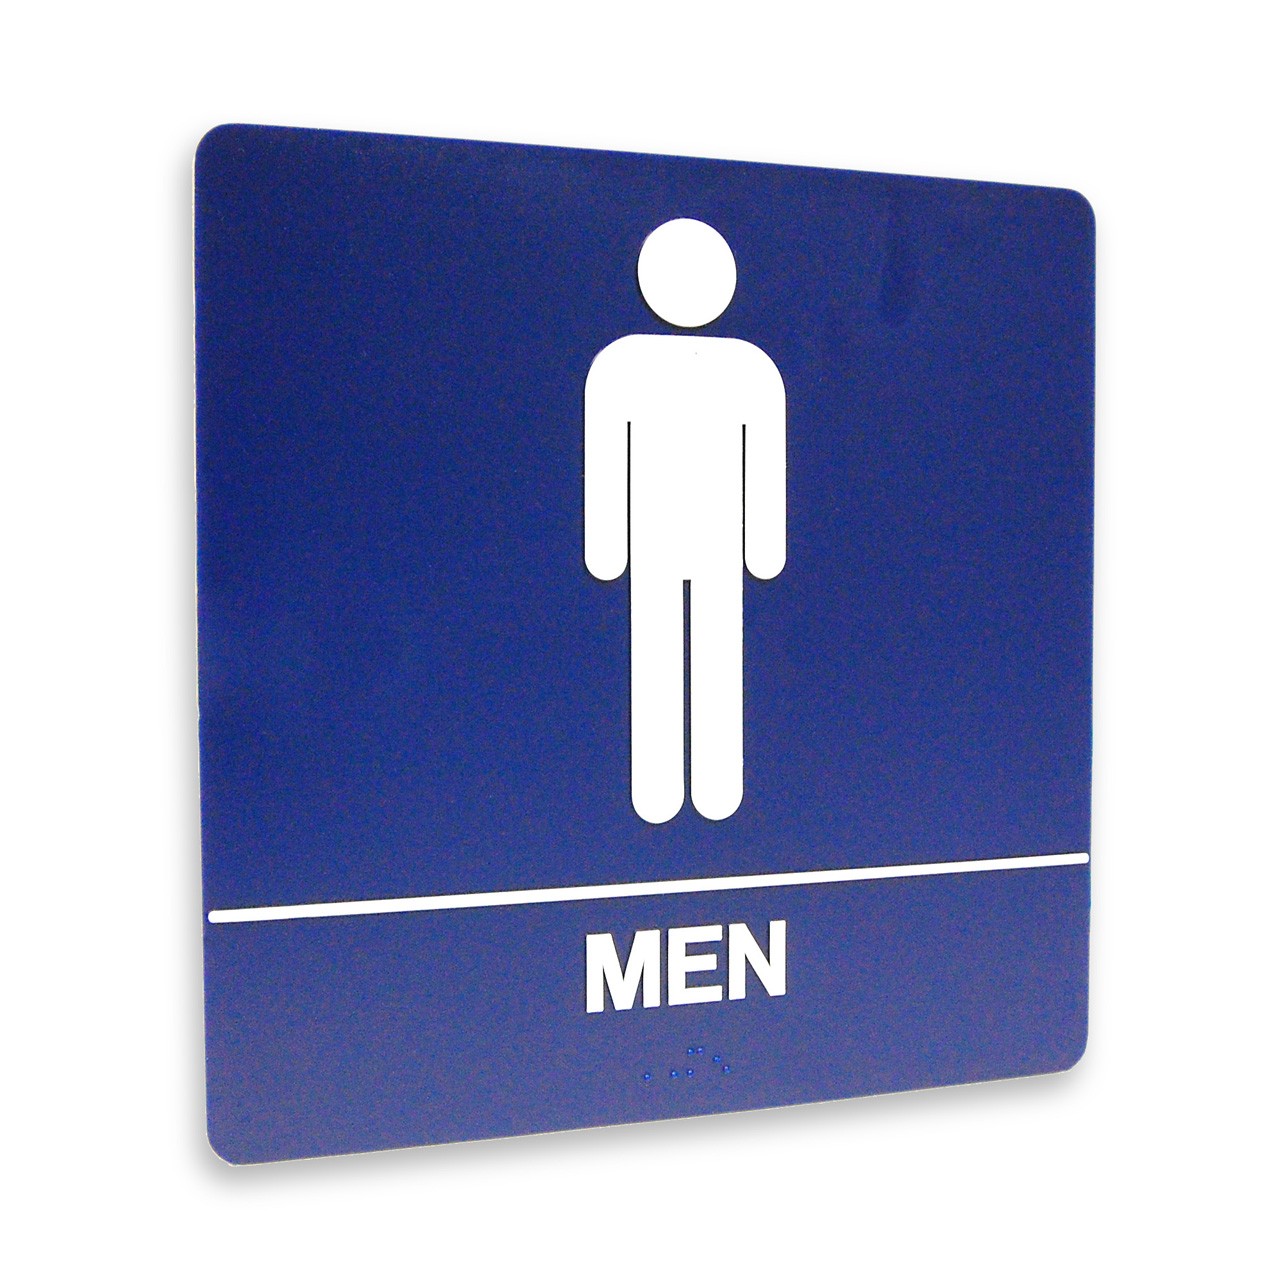 40 Men Restroom Symbol Free Cliparts That You Can Download To You